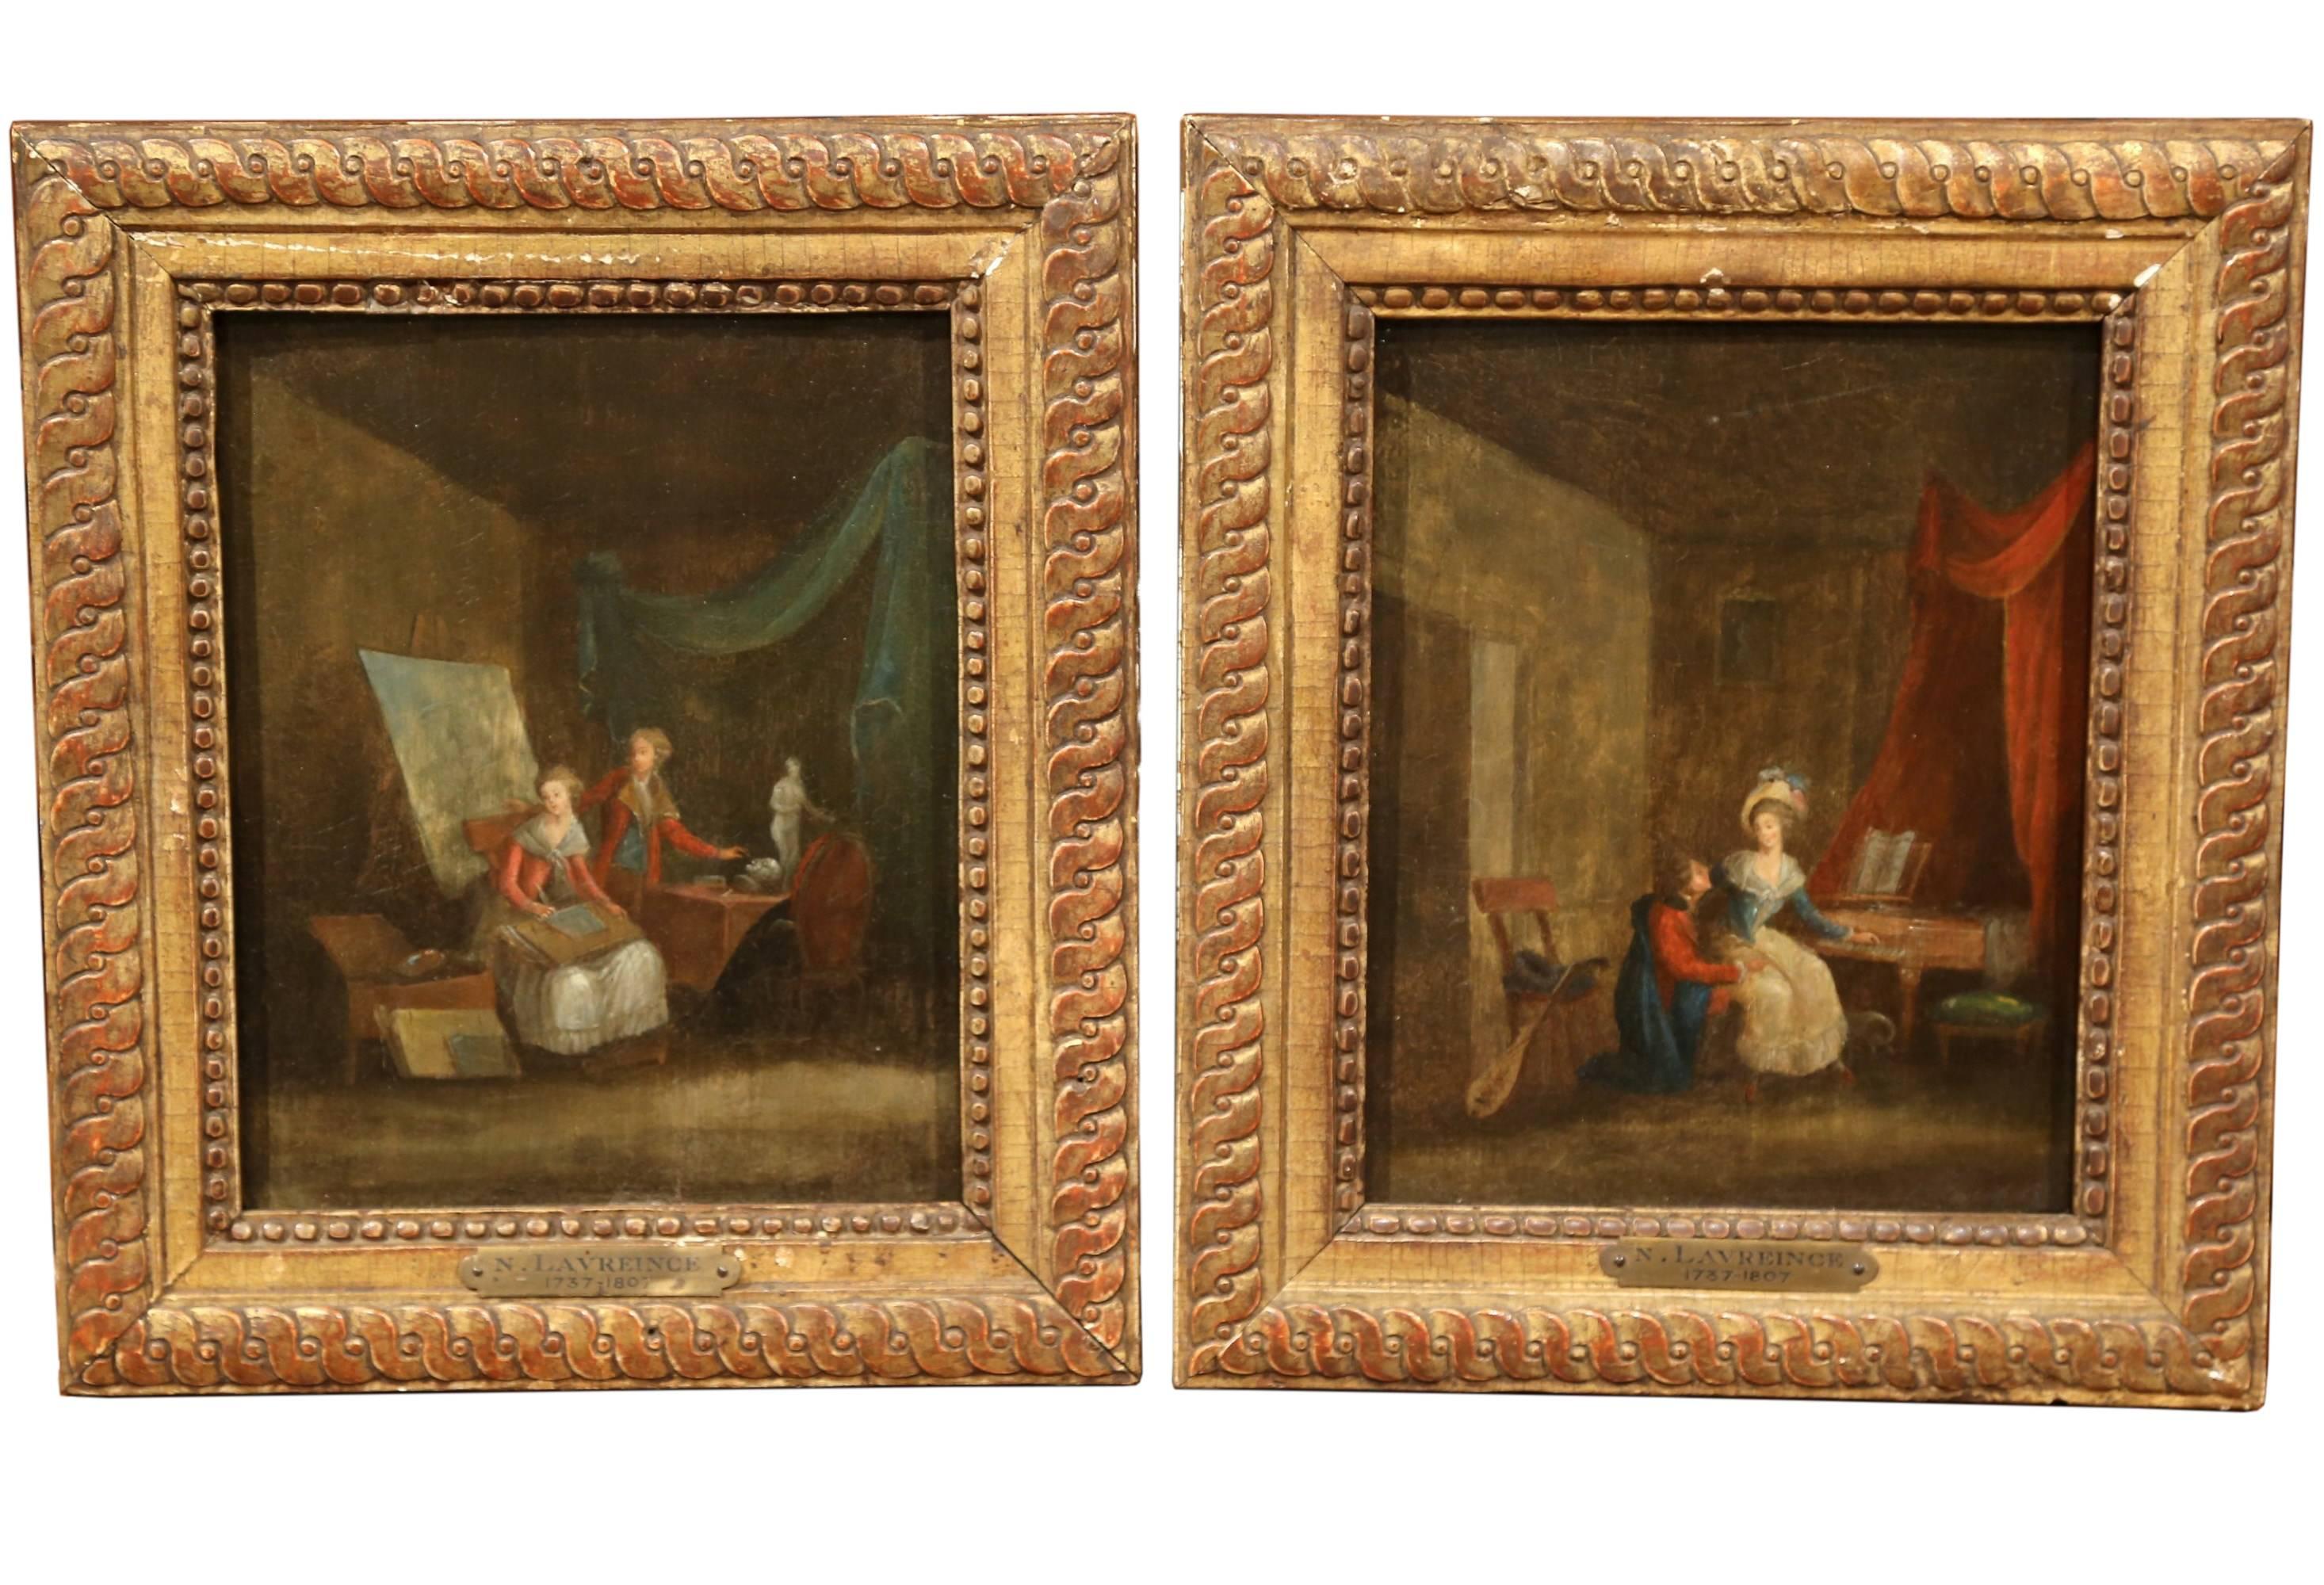 Niklas Lavreince Interior Painting - Pair of 18th Century Paintings on Board in Gilt Frames Signed N. Lavreince